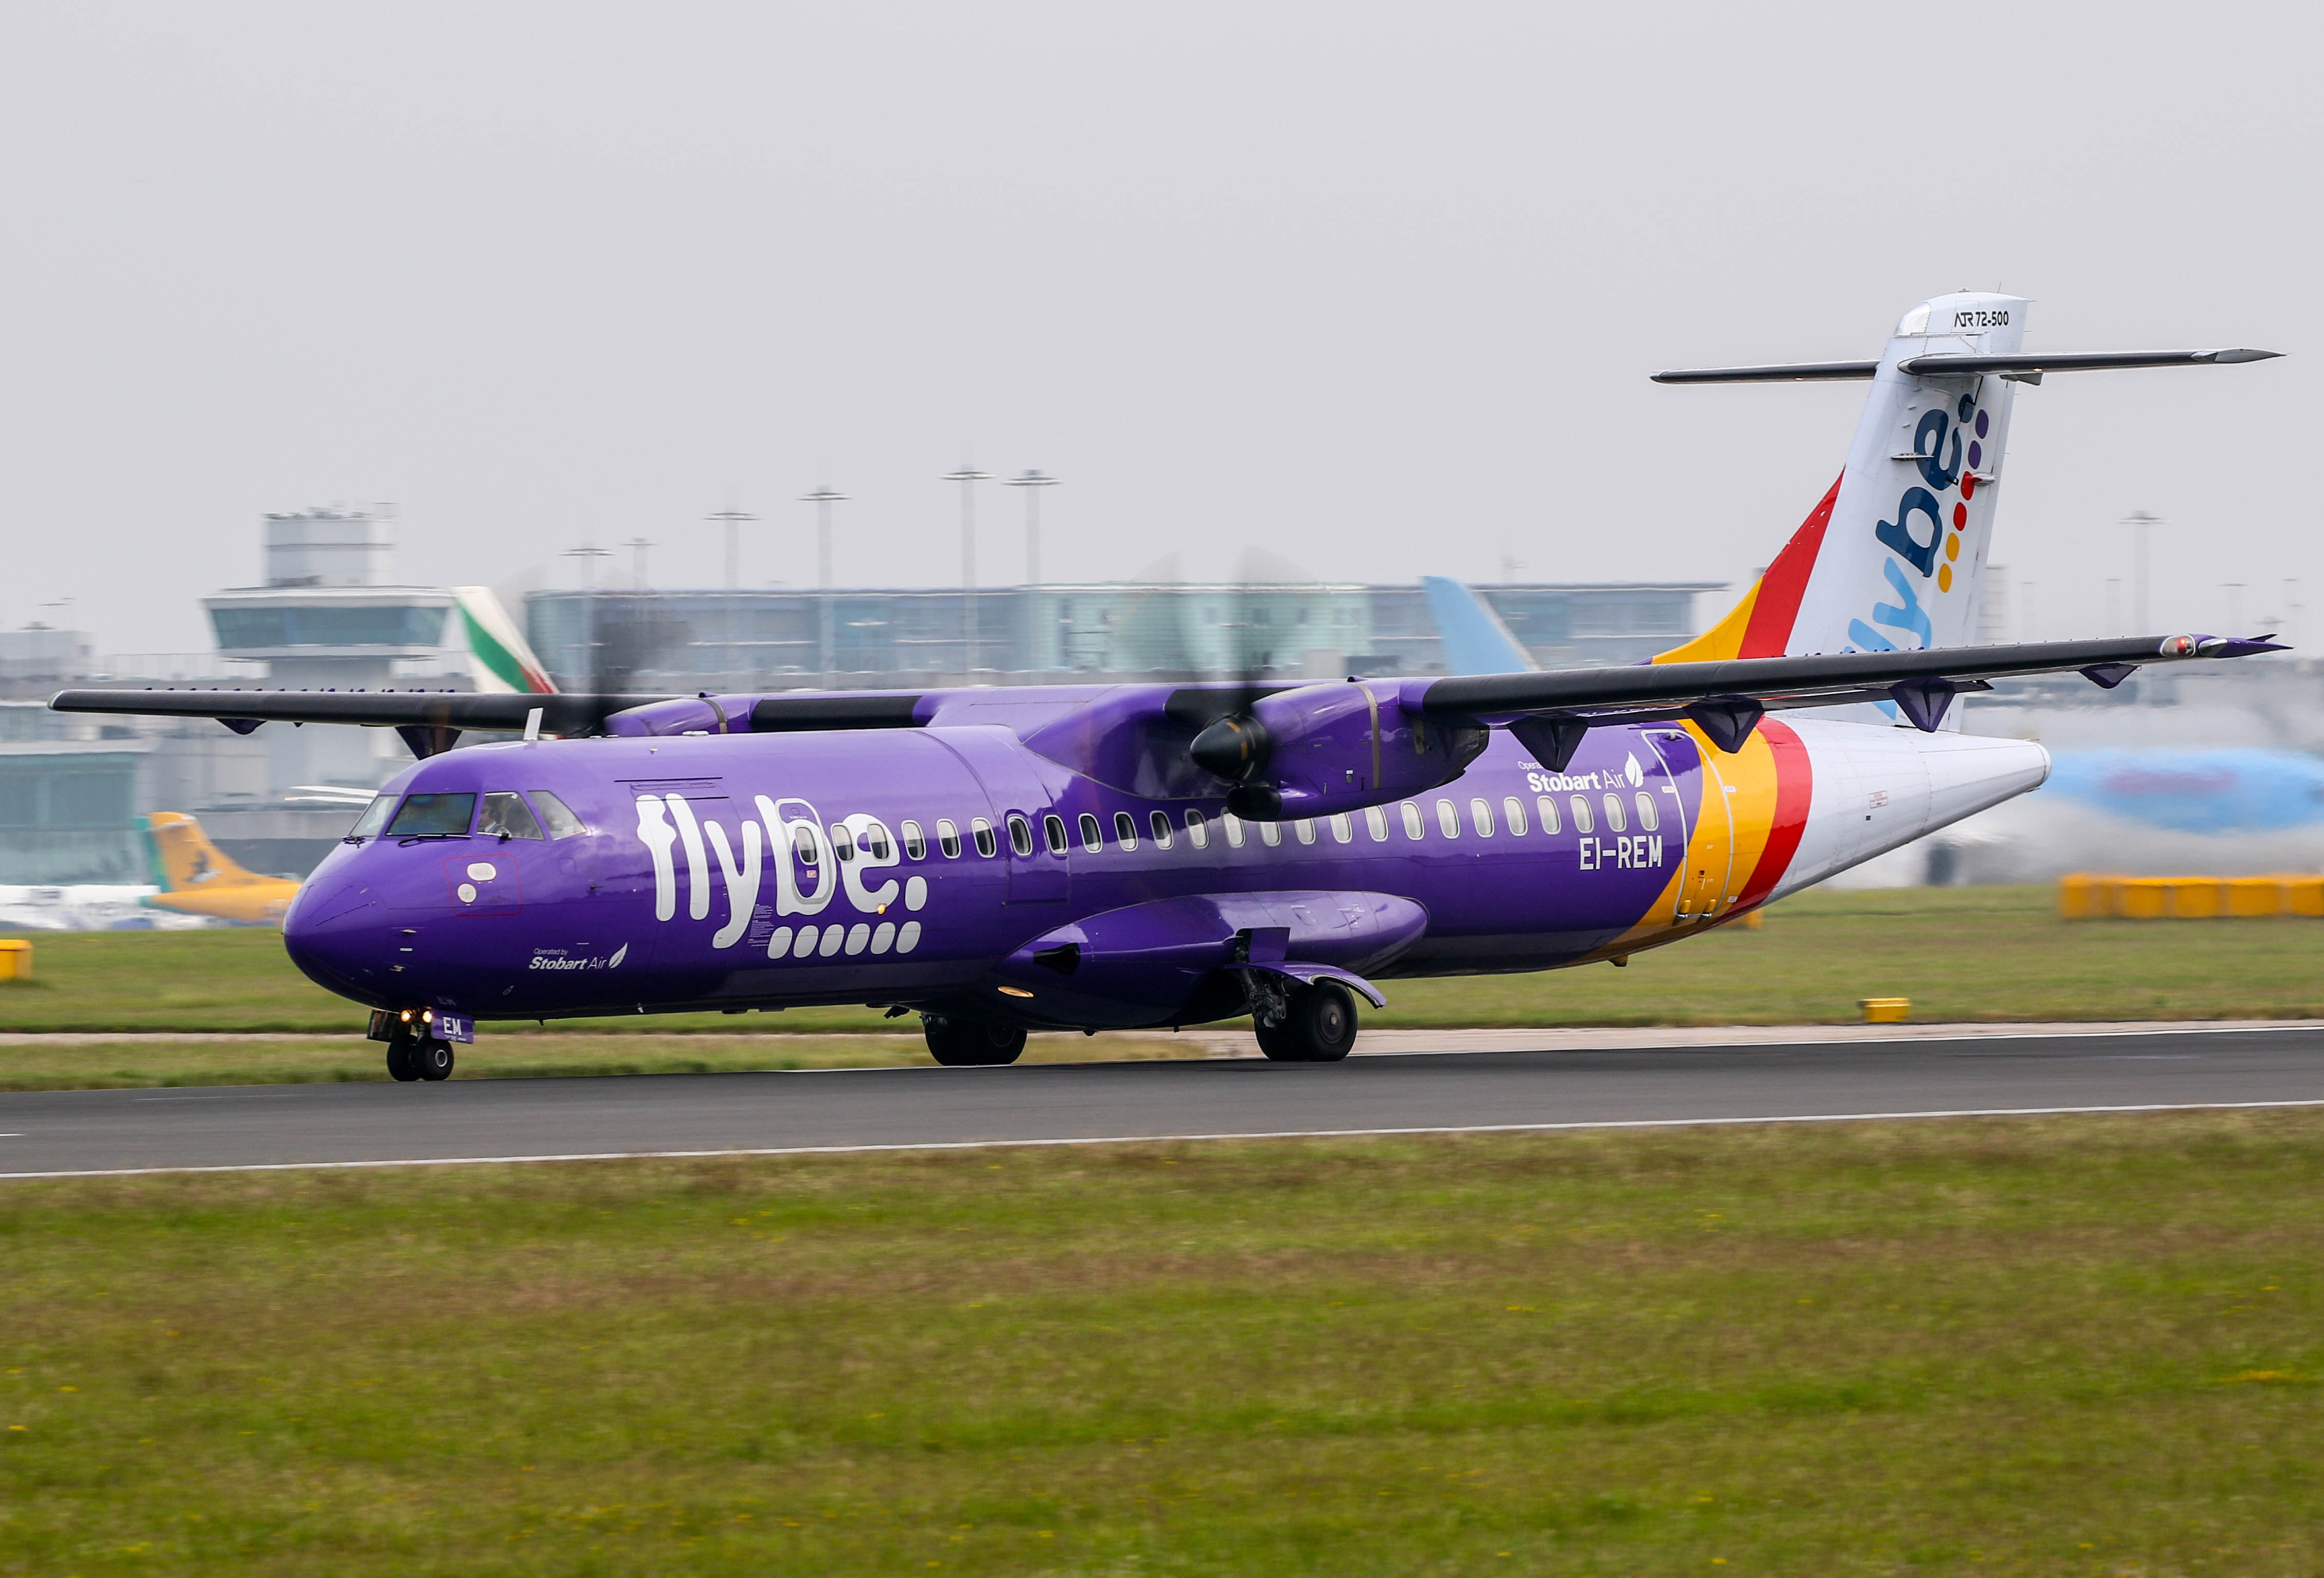 Cornwall Airport turns into ghost town after Flybe collapse